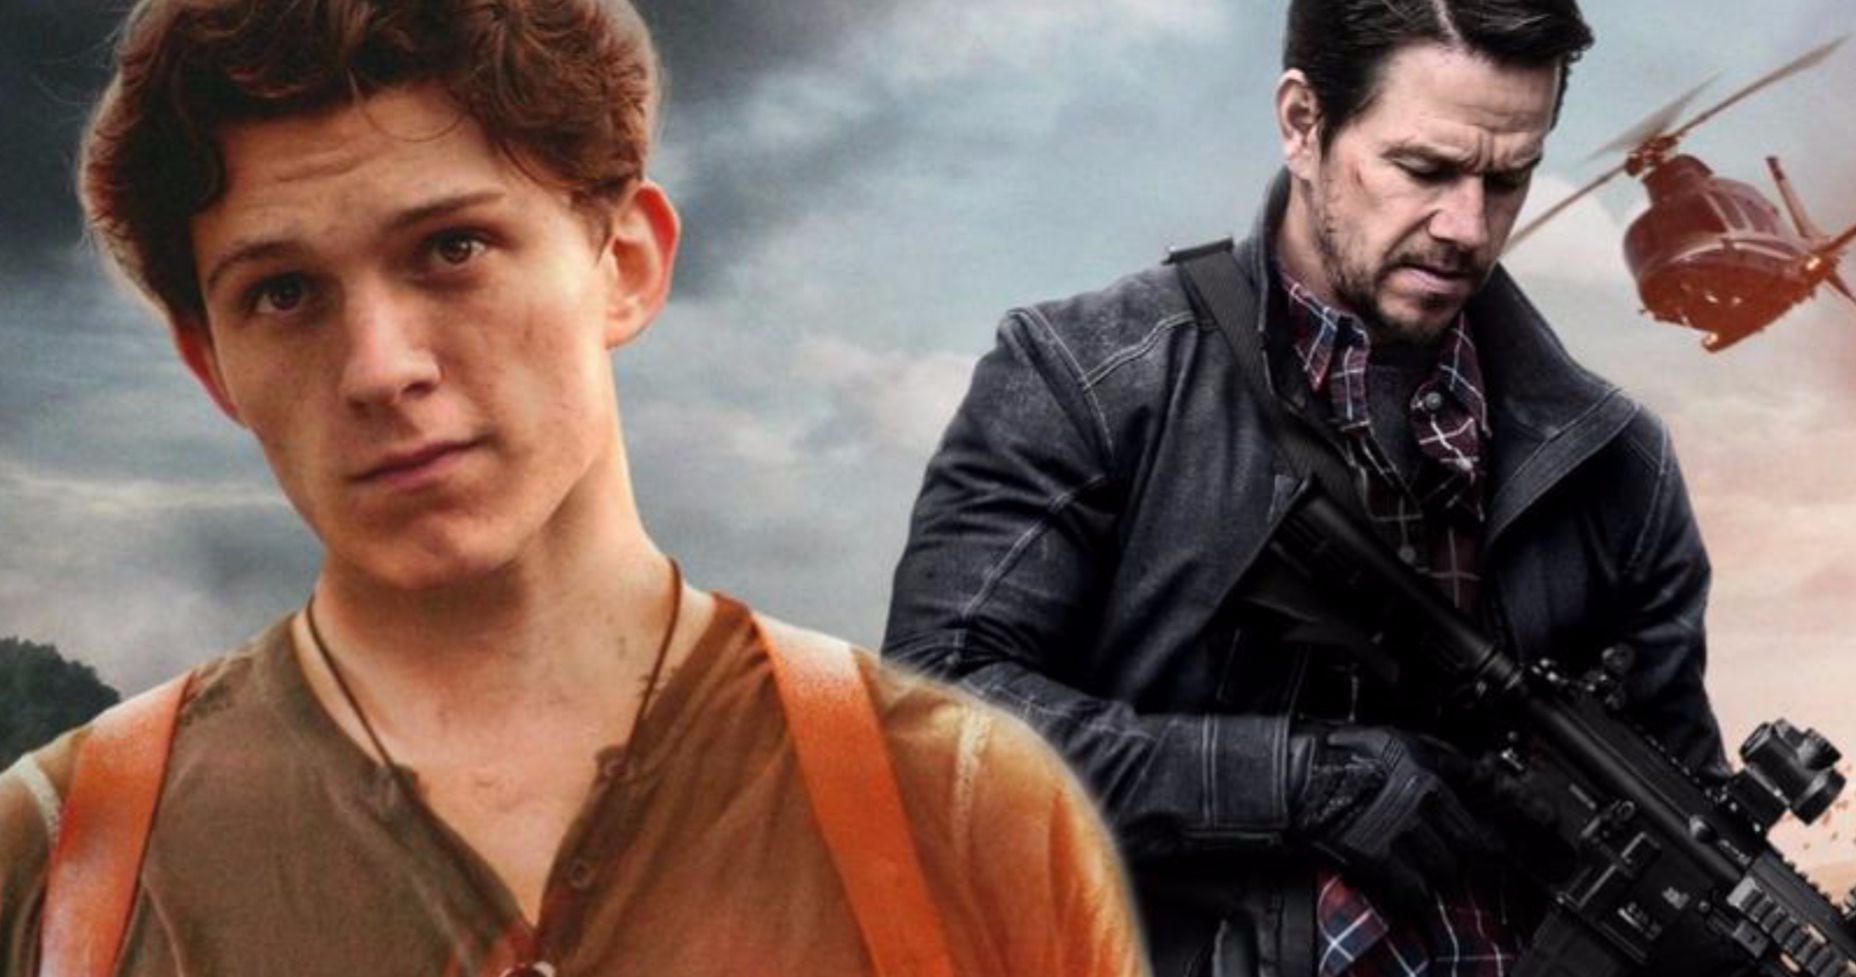 Uncharted Set Photos Bring First Look at Tom Holland &amp; Mark Wahlberg